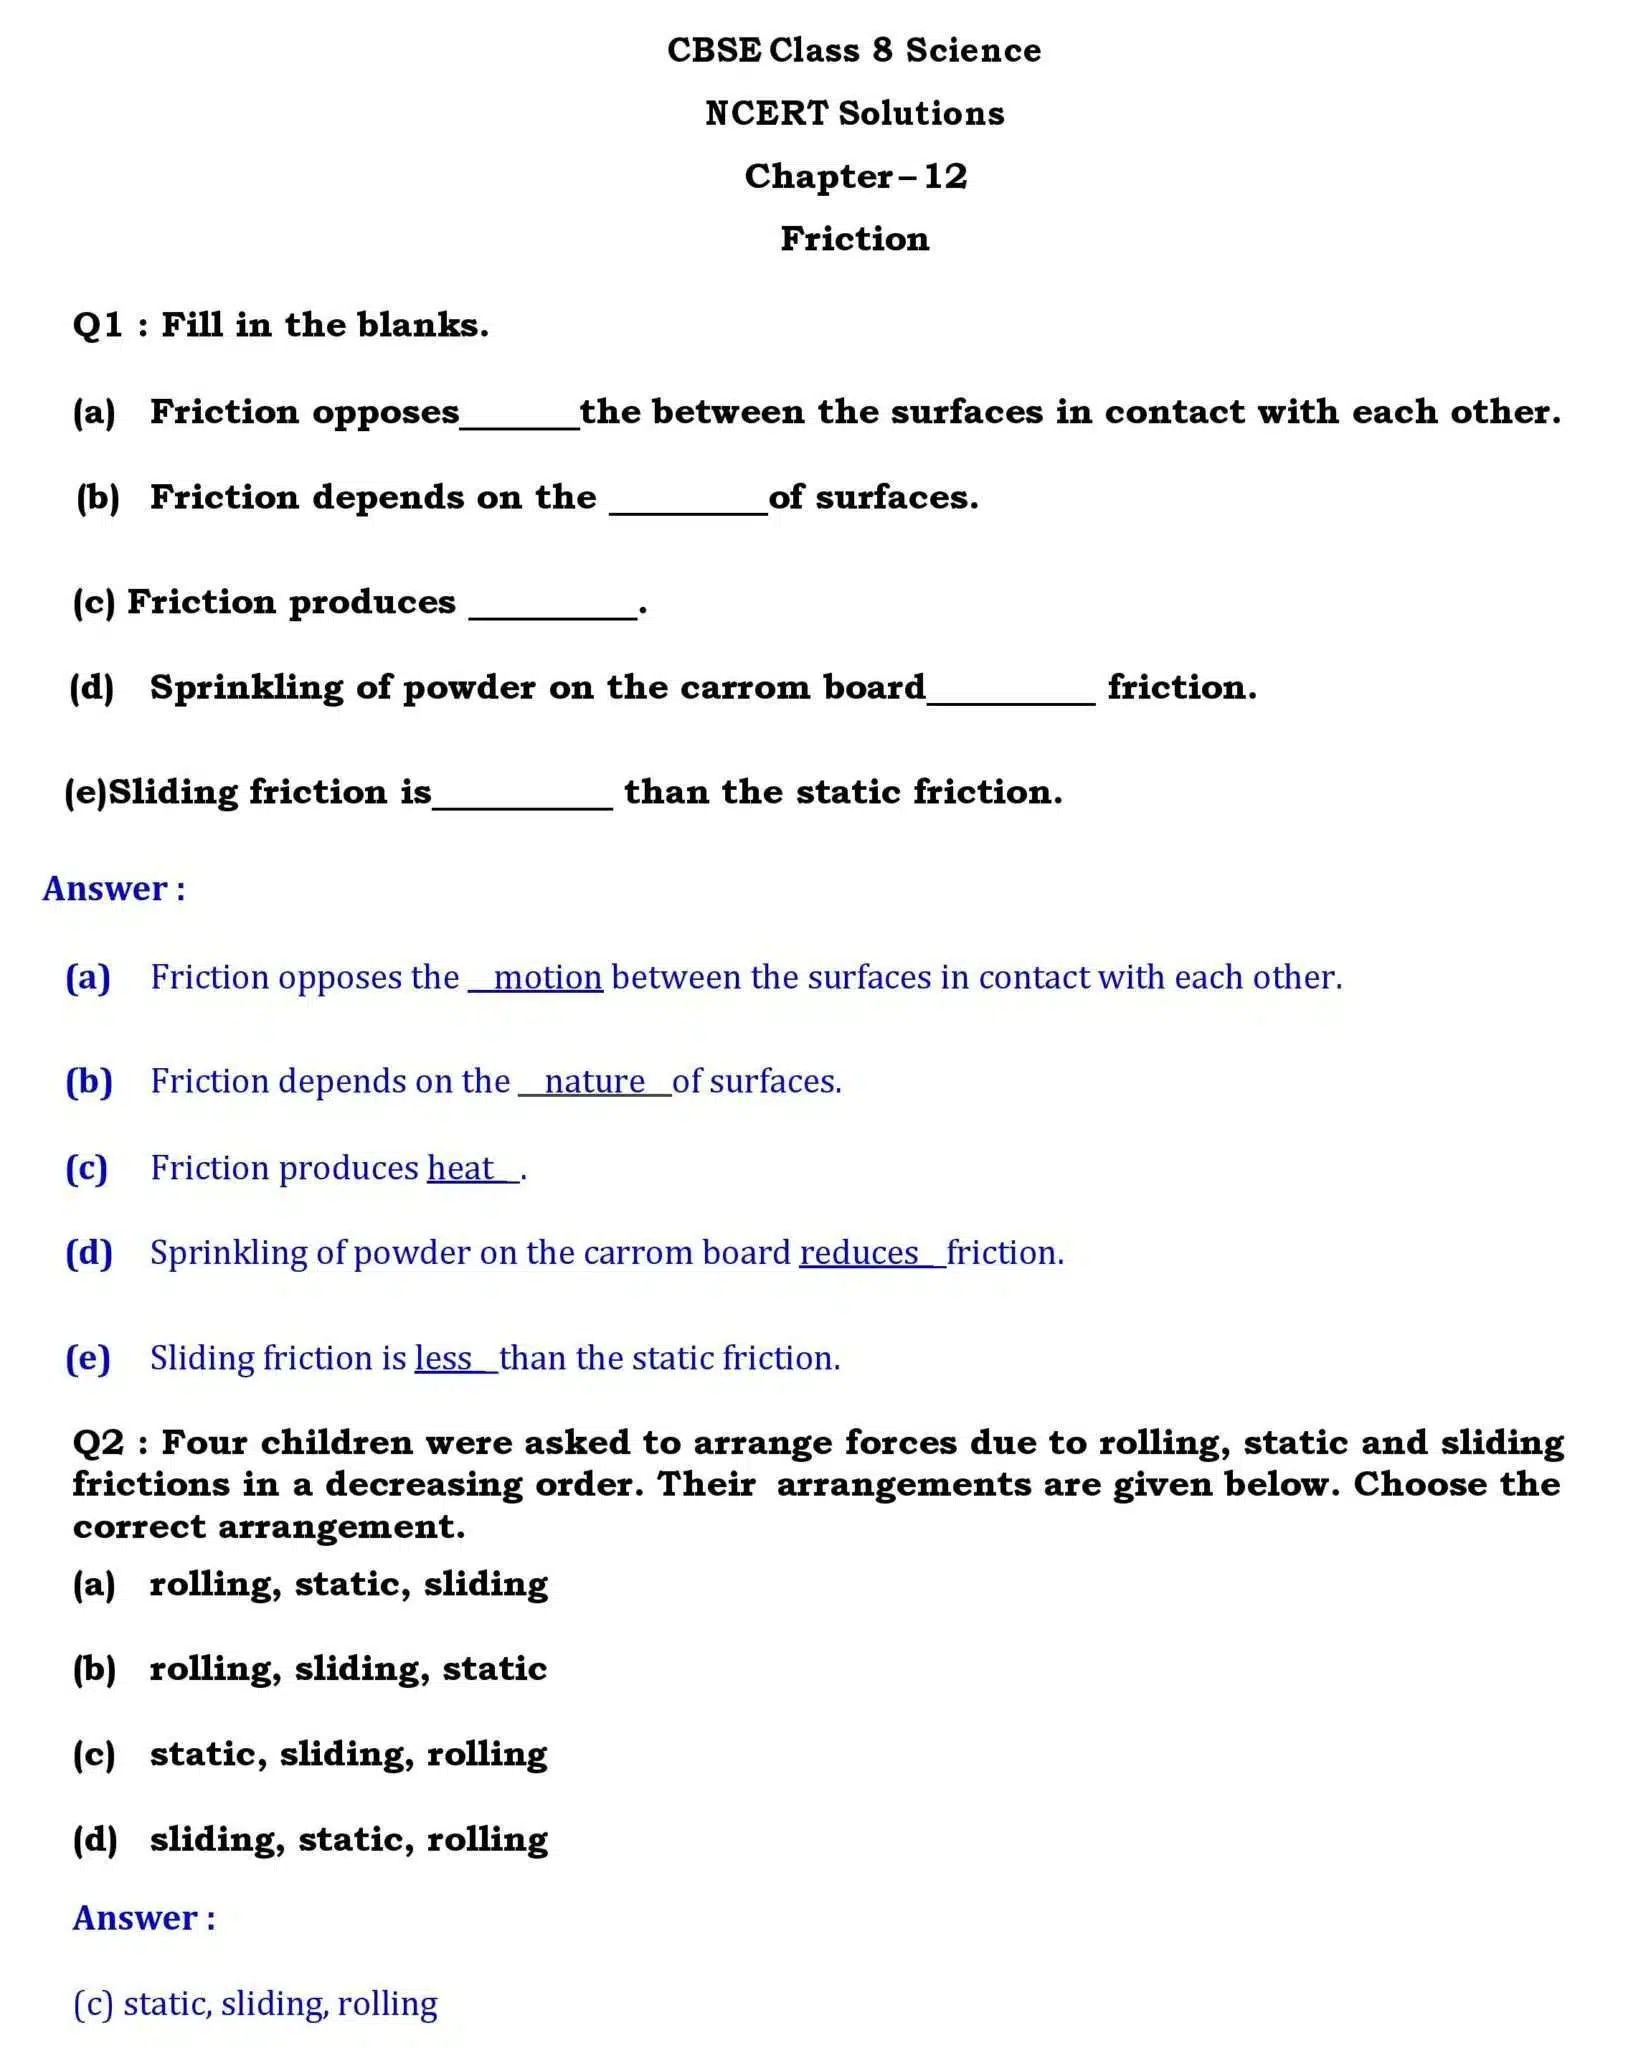 NCERT Solutions for Class 8 Science Chapter 12 page 001